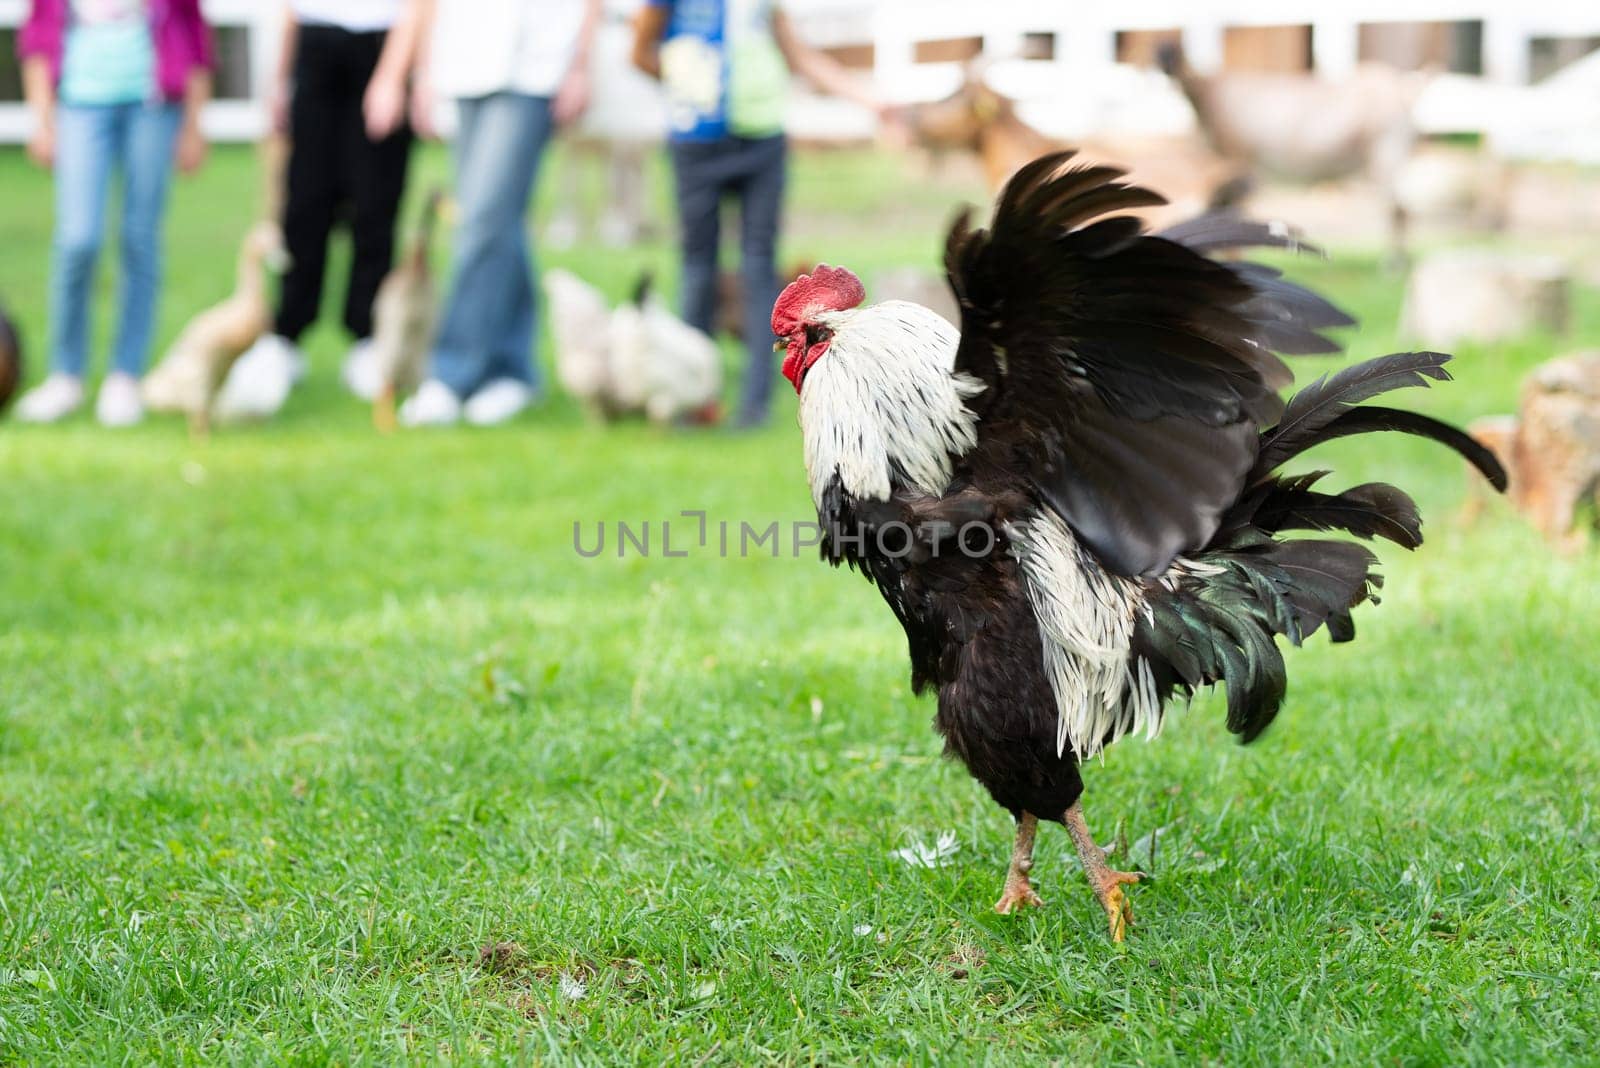 Rooster with black and white feathers. High quality photo